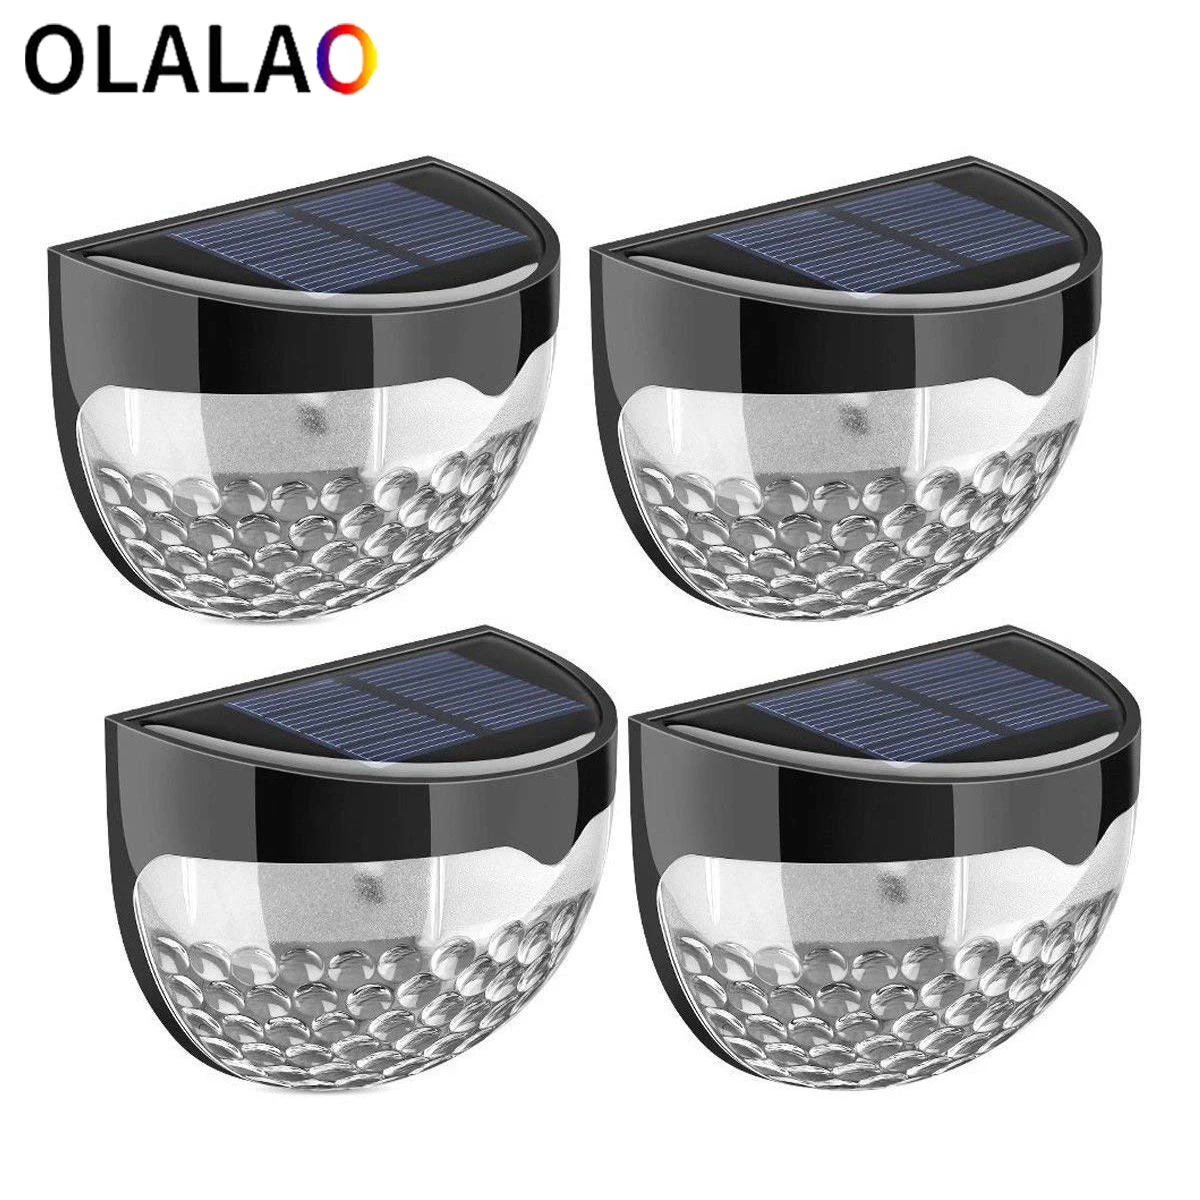 

4 Pcs Solar 6 Bright LED Fence Wall Lights Outdoor Garden Shed Waterproof IP65 Light For Patio Yard Garage Stairway Gate Door